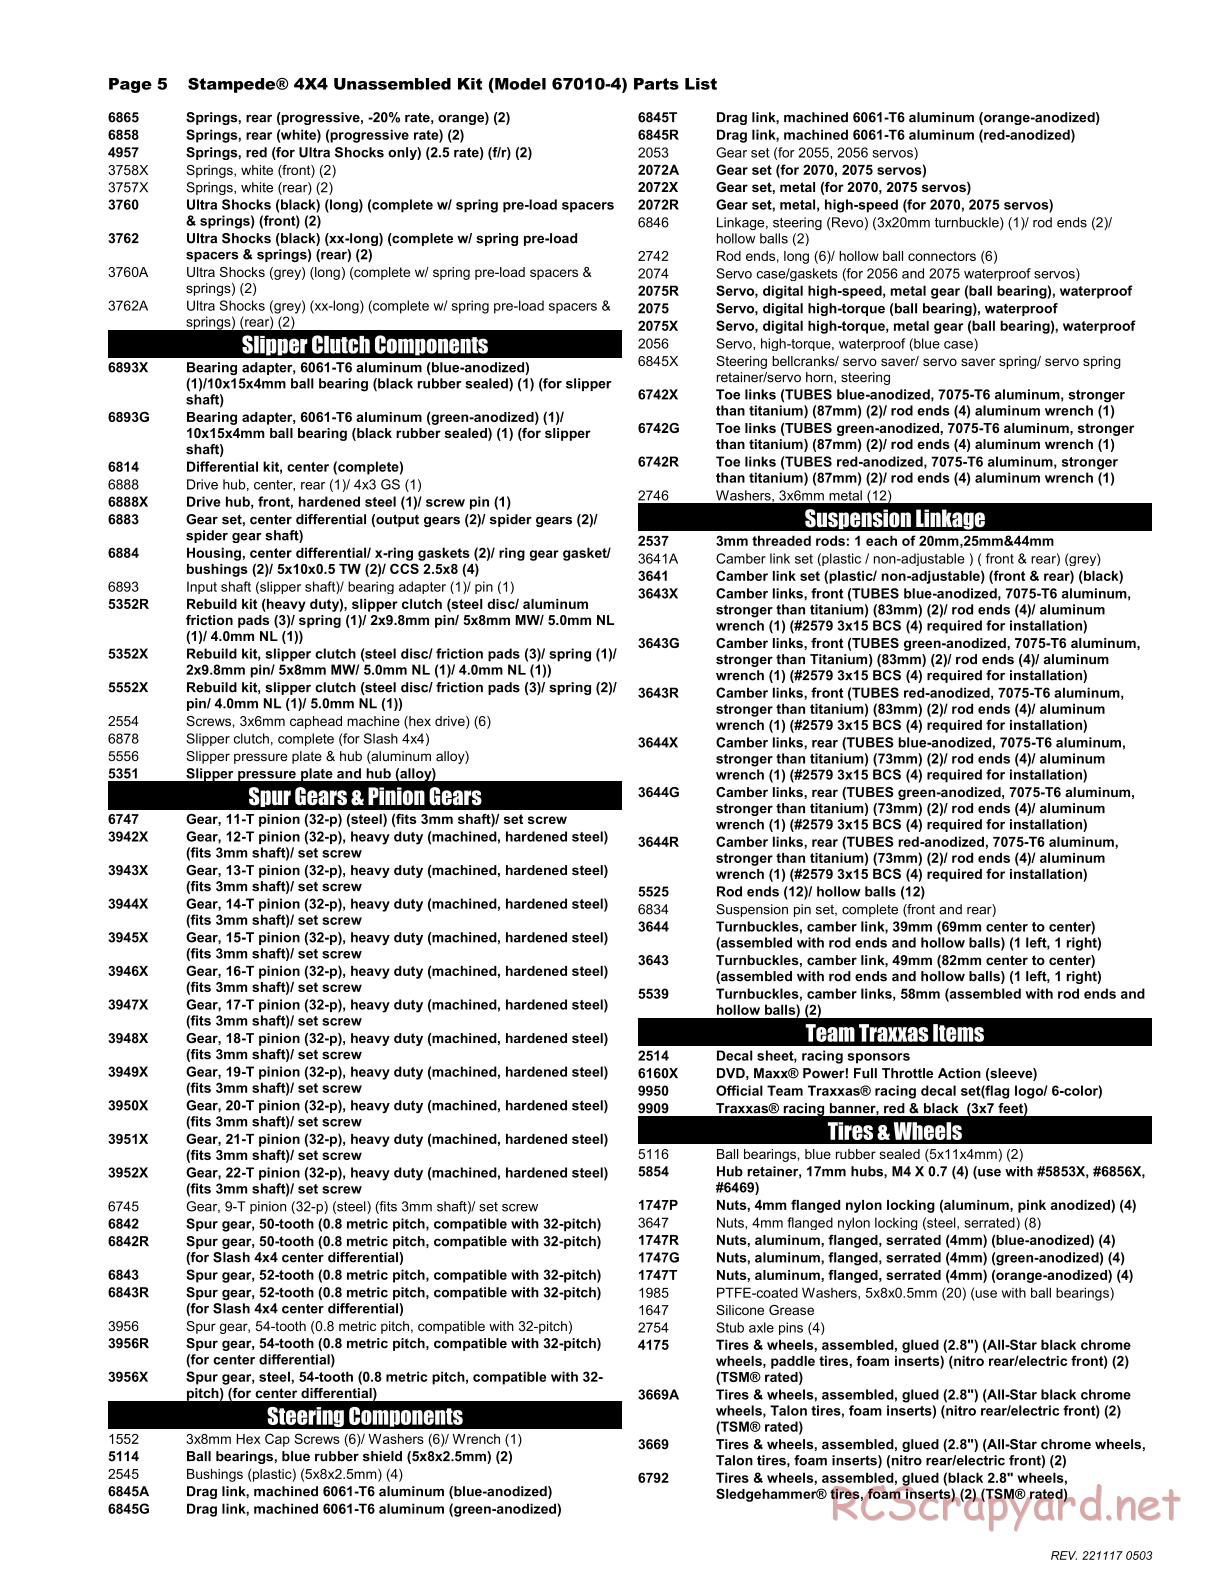 Traxxas - Stampede 4x4 (2019) - Parts List - Page 5